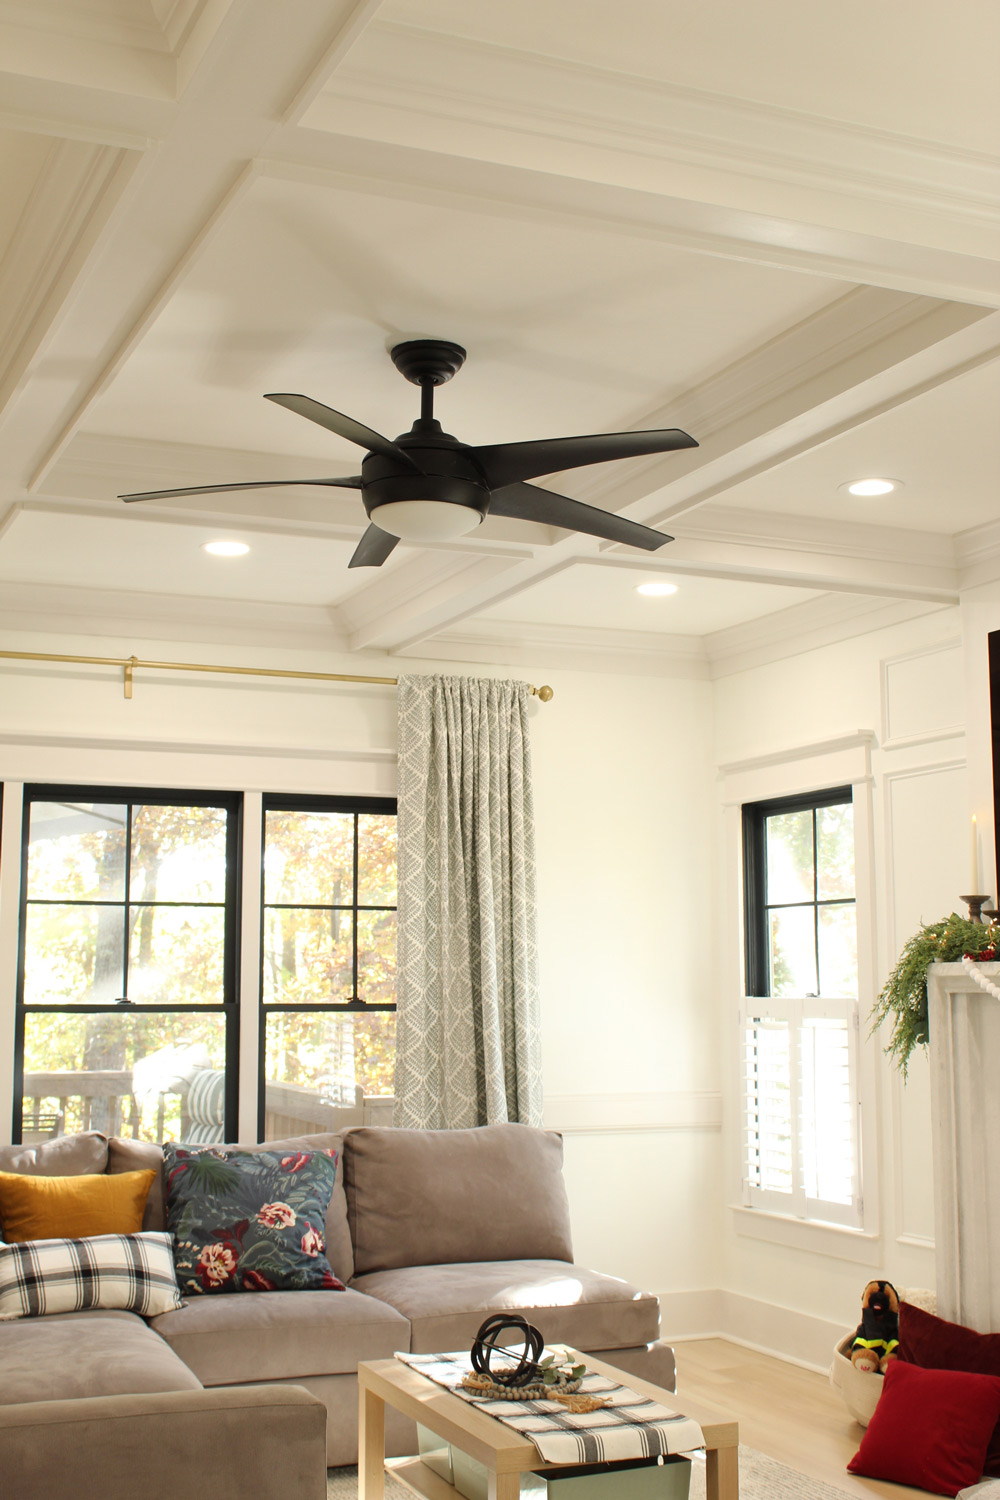 Living room ceiling featuring ceiling fan, trim and recessed lights.